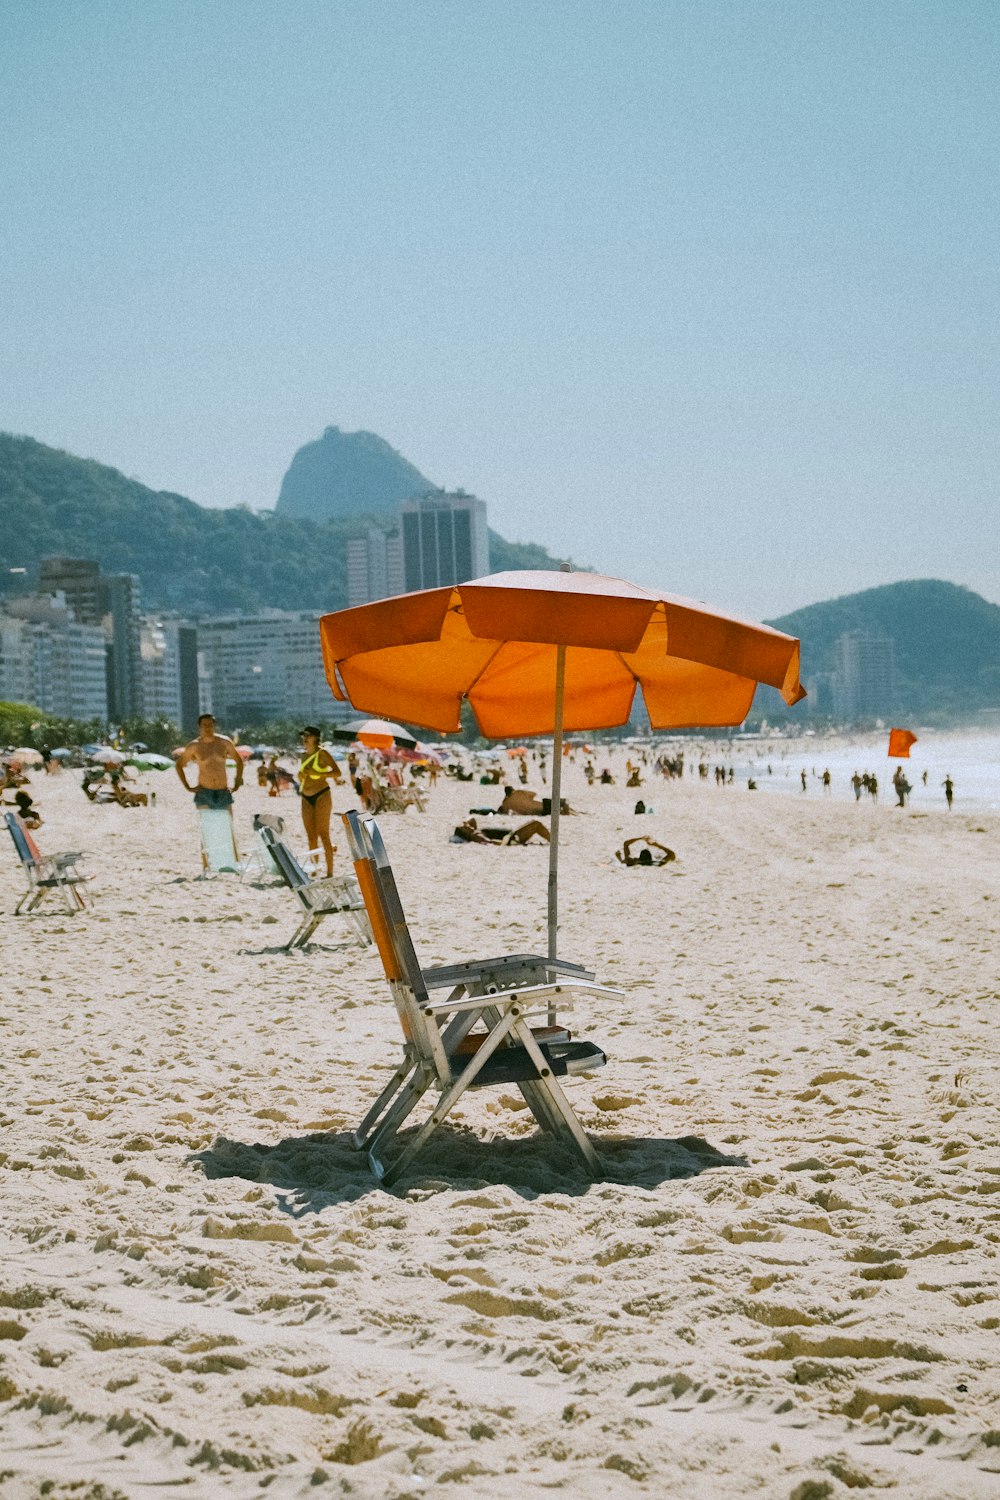 a chair and umbrella on a beach with people in the background